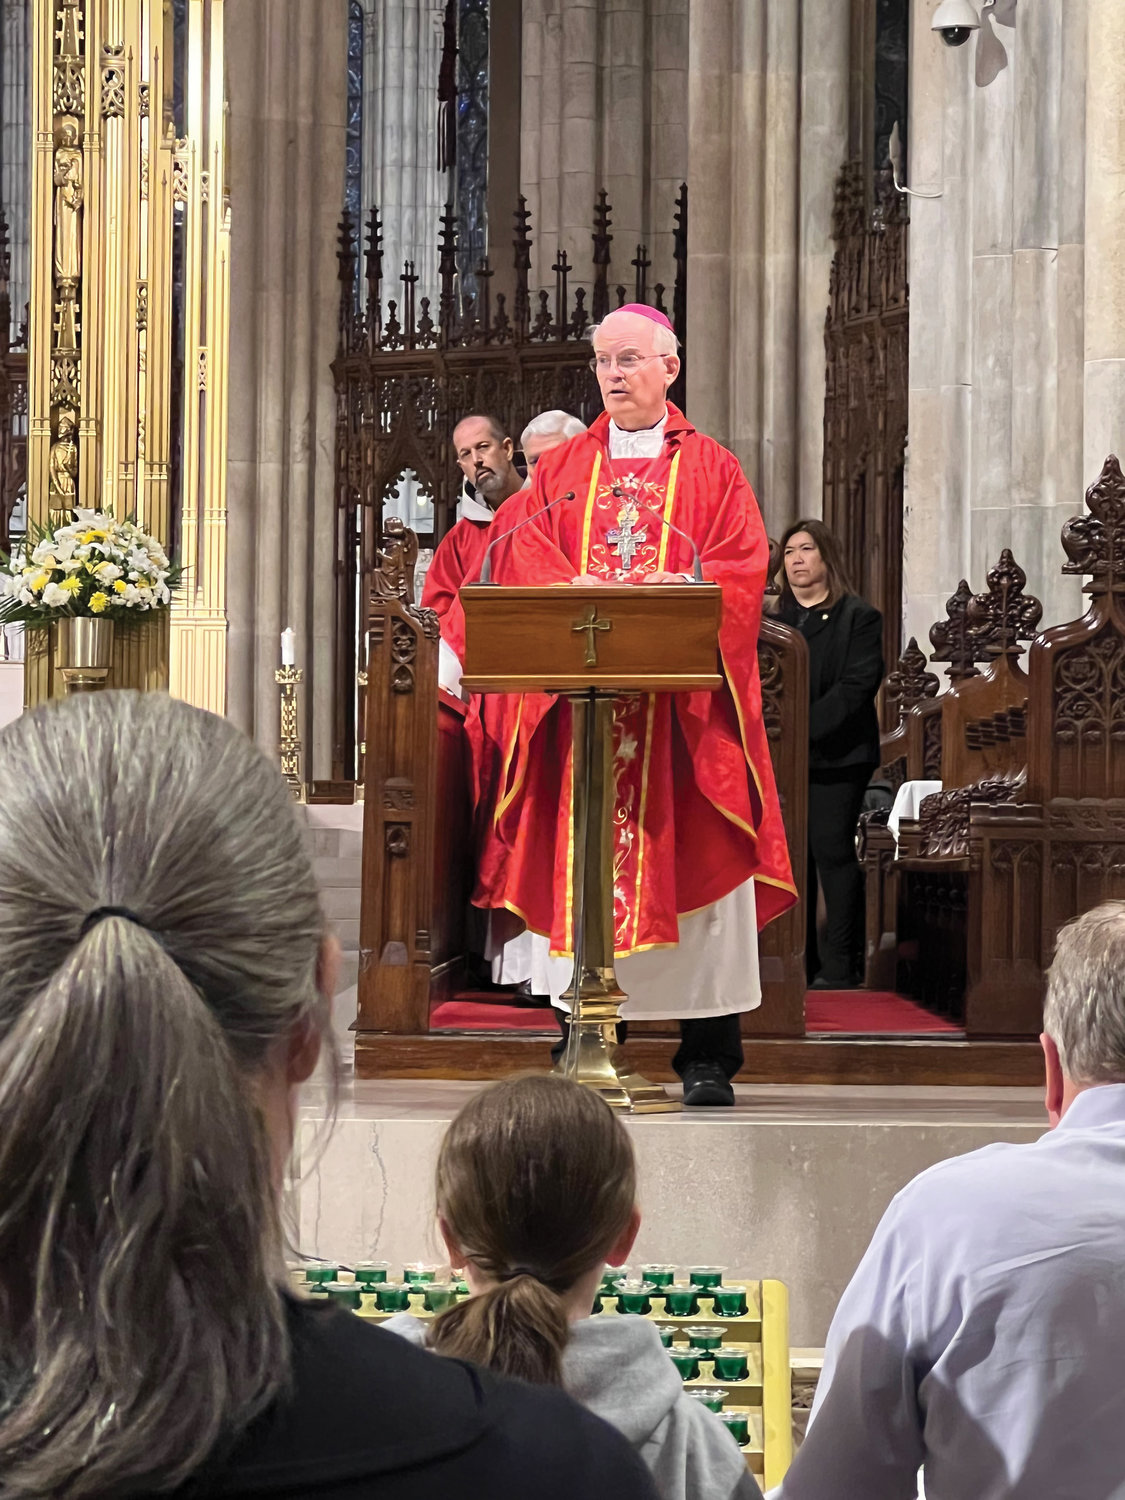 LIFE LEADERSHIP—Auxiliary Bishop Peter Byrne preaches during the Sept. 26 Mass at St. Patrick’s Cathedral kicking off the fall 40 Days for Life campaign in the archdiocese.